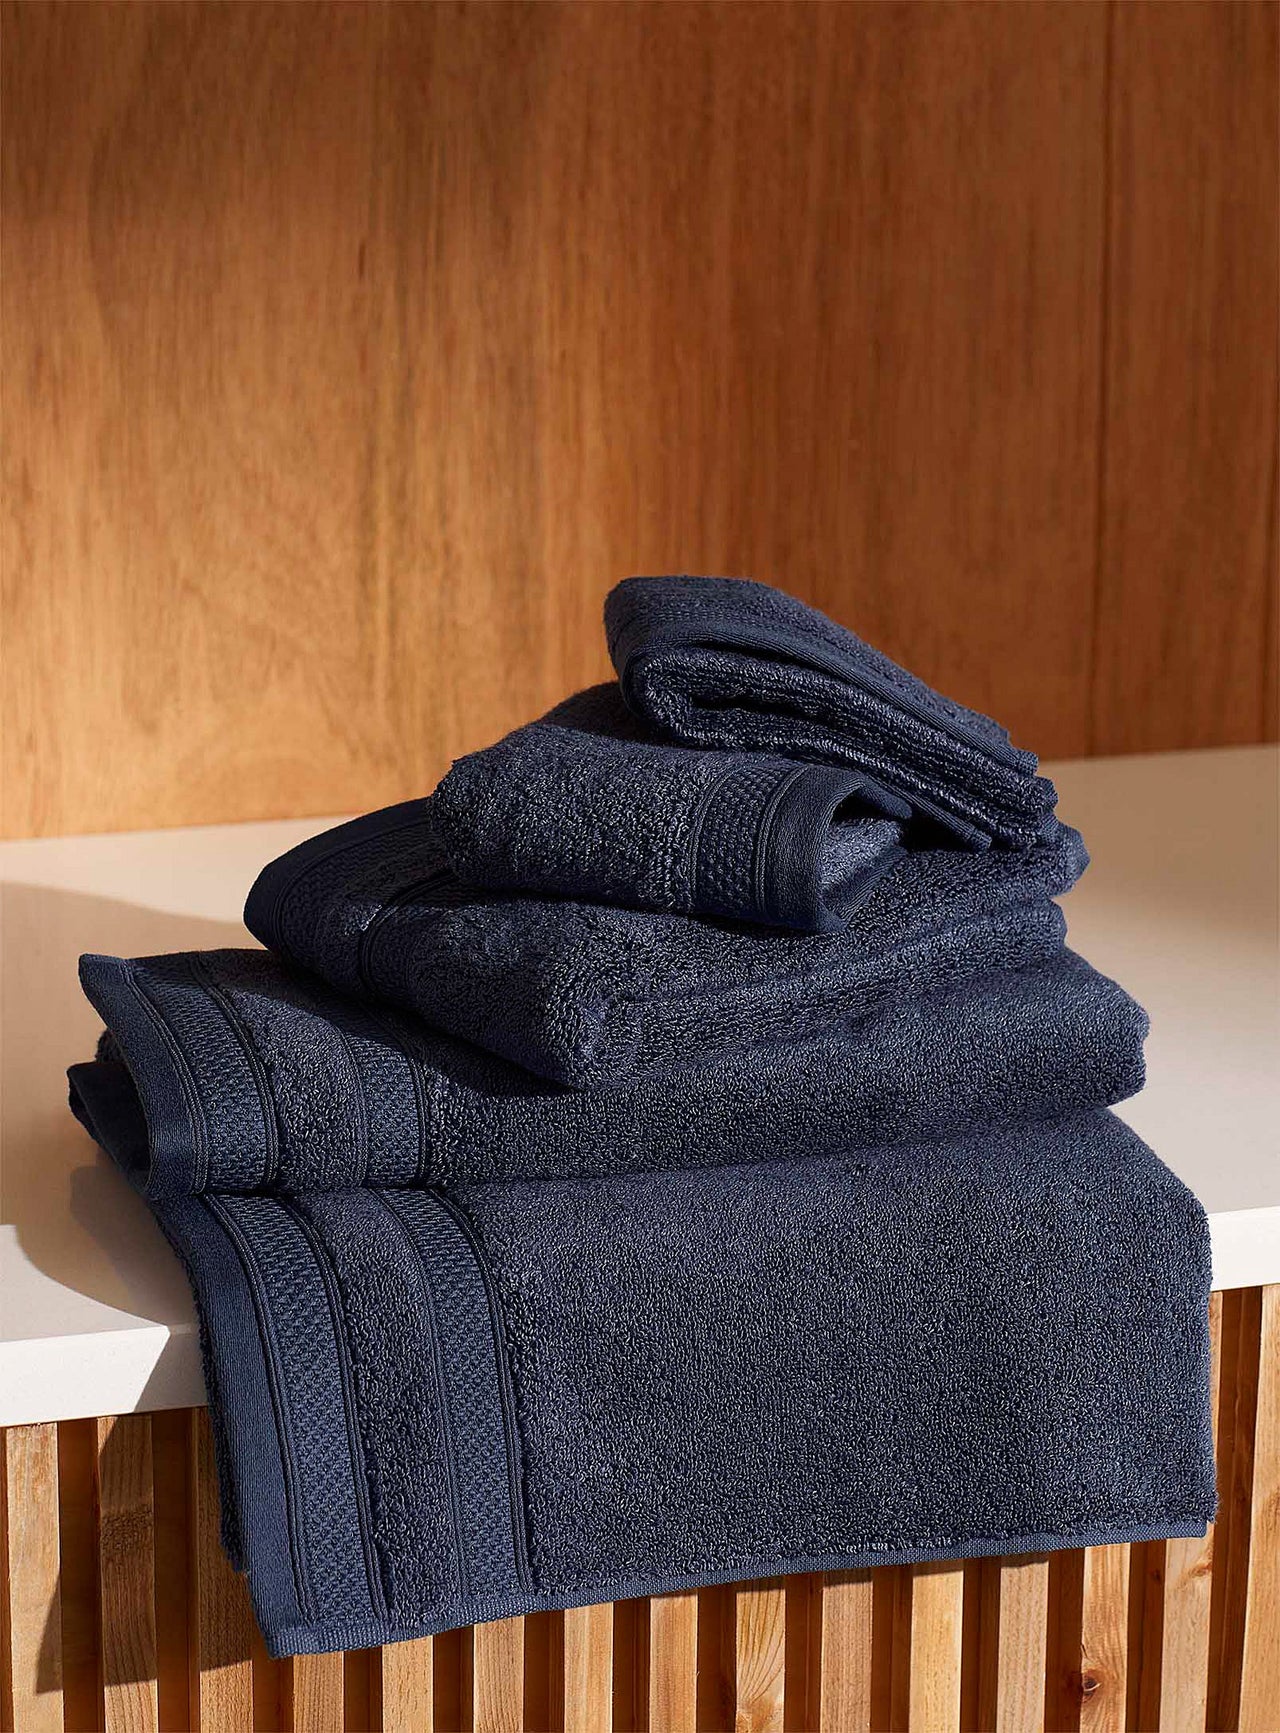 Cotton and modal towels